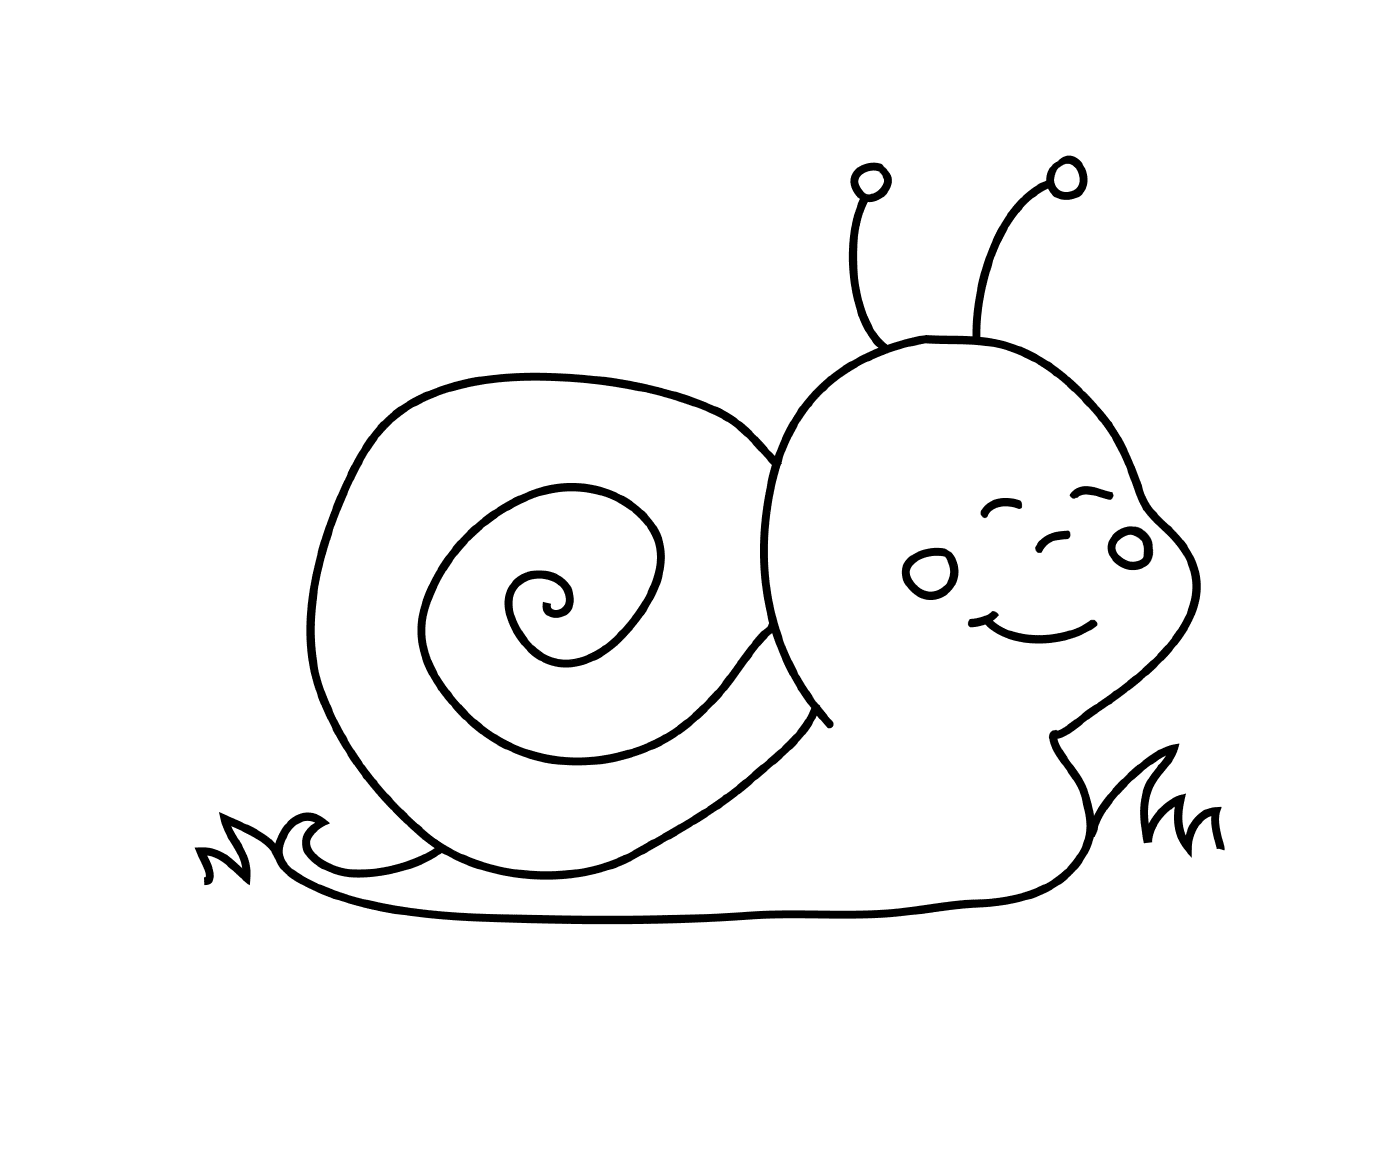  A snail in the Minion style 